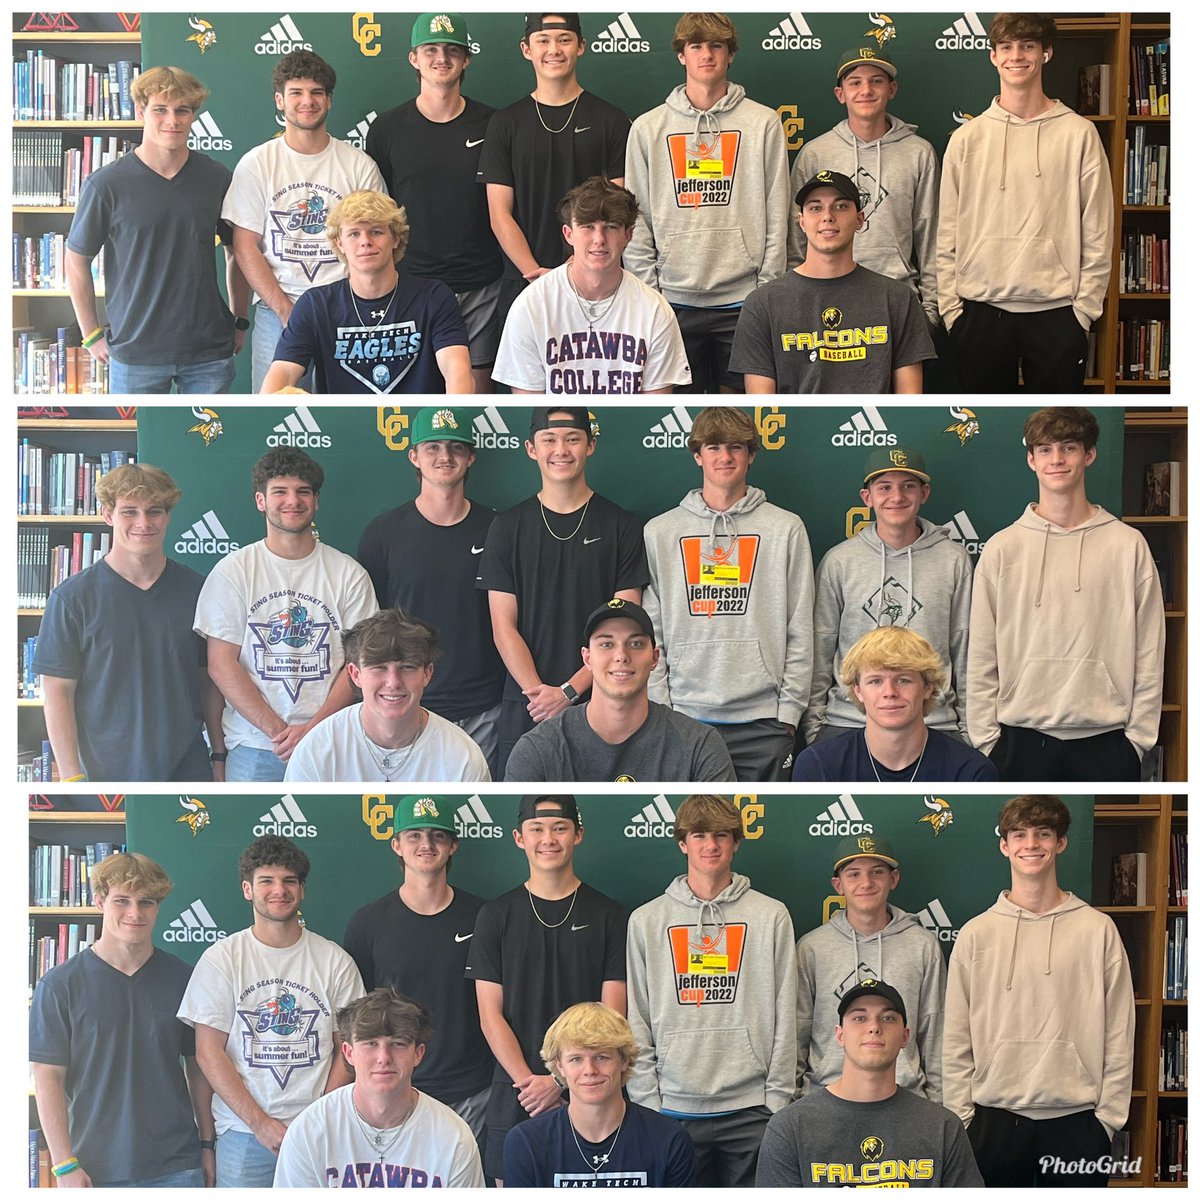 @CCHSBaseball_13 had a BIG Signing Day! Not one, or two, but THREE of our boys will continue to play America’s pastime at the next level. @christiantuck1_ - @catawbaindians @NoahCottone @pfeifferbaseball @raedermcintire @waketechbsb